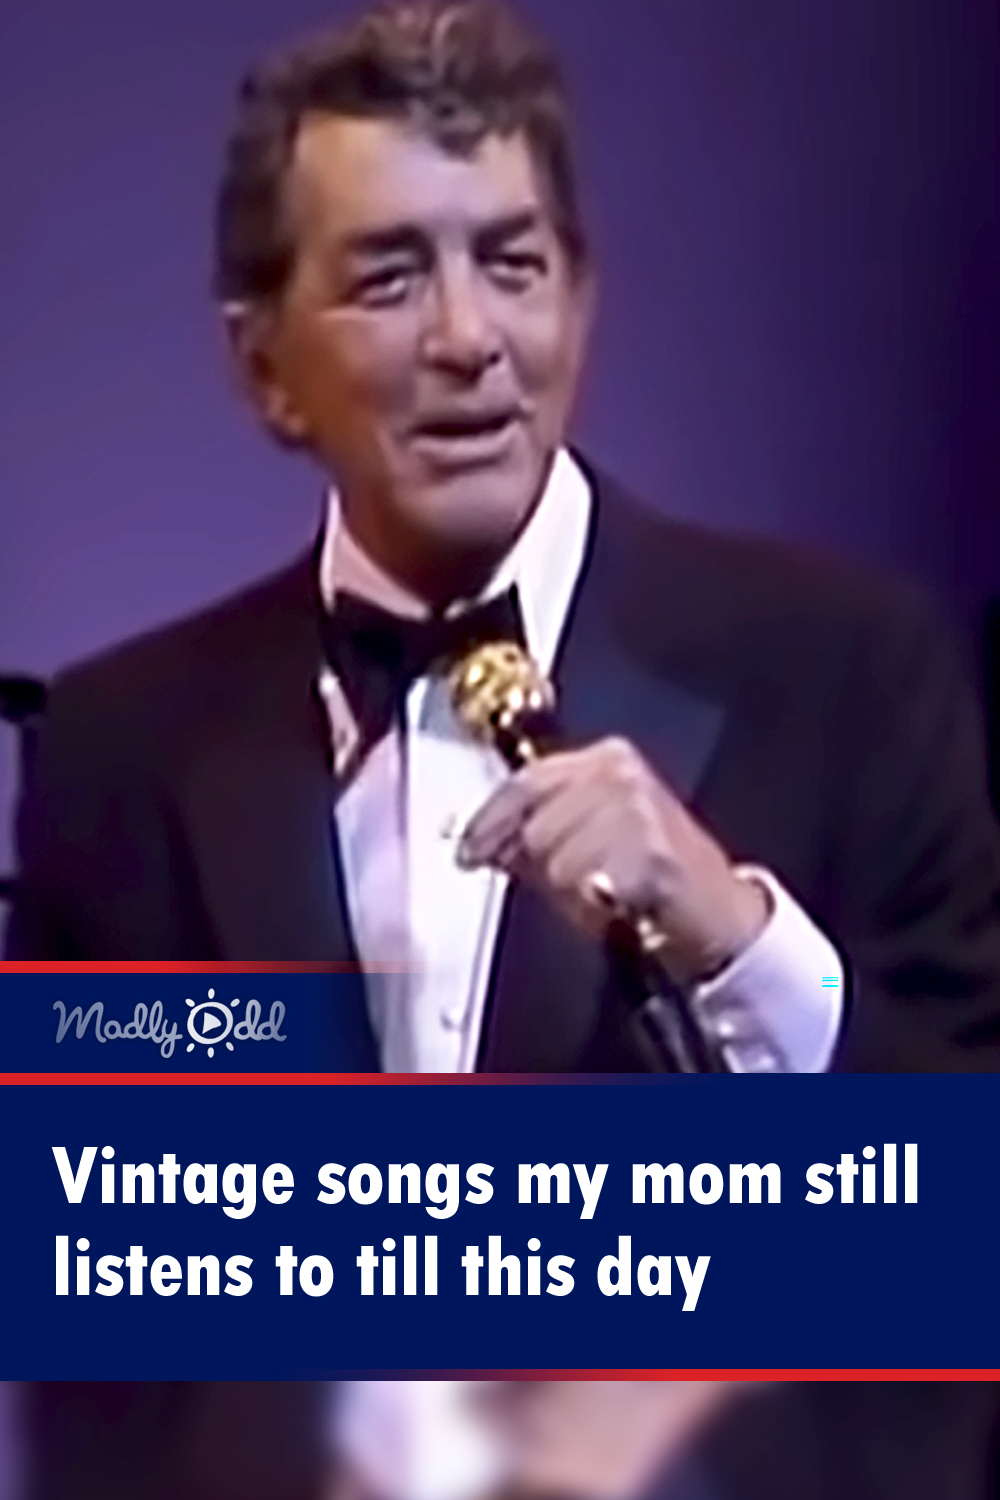 Vintage Playlist highlights the great music of the 50s and 60s.